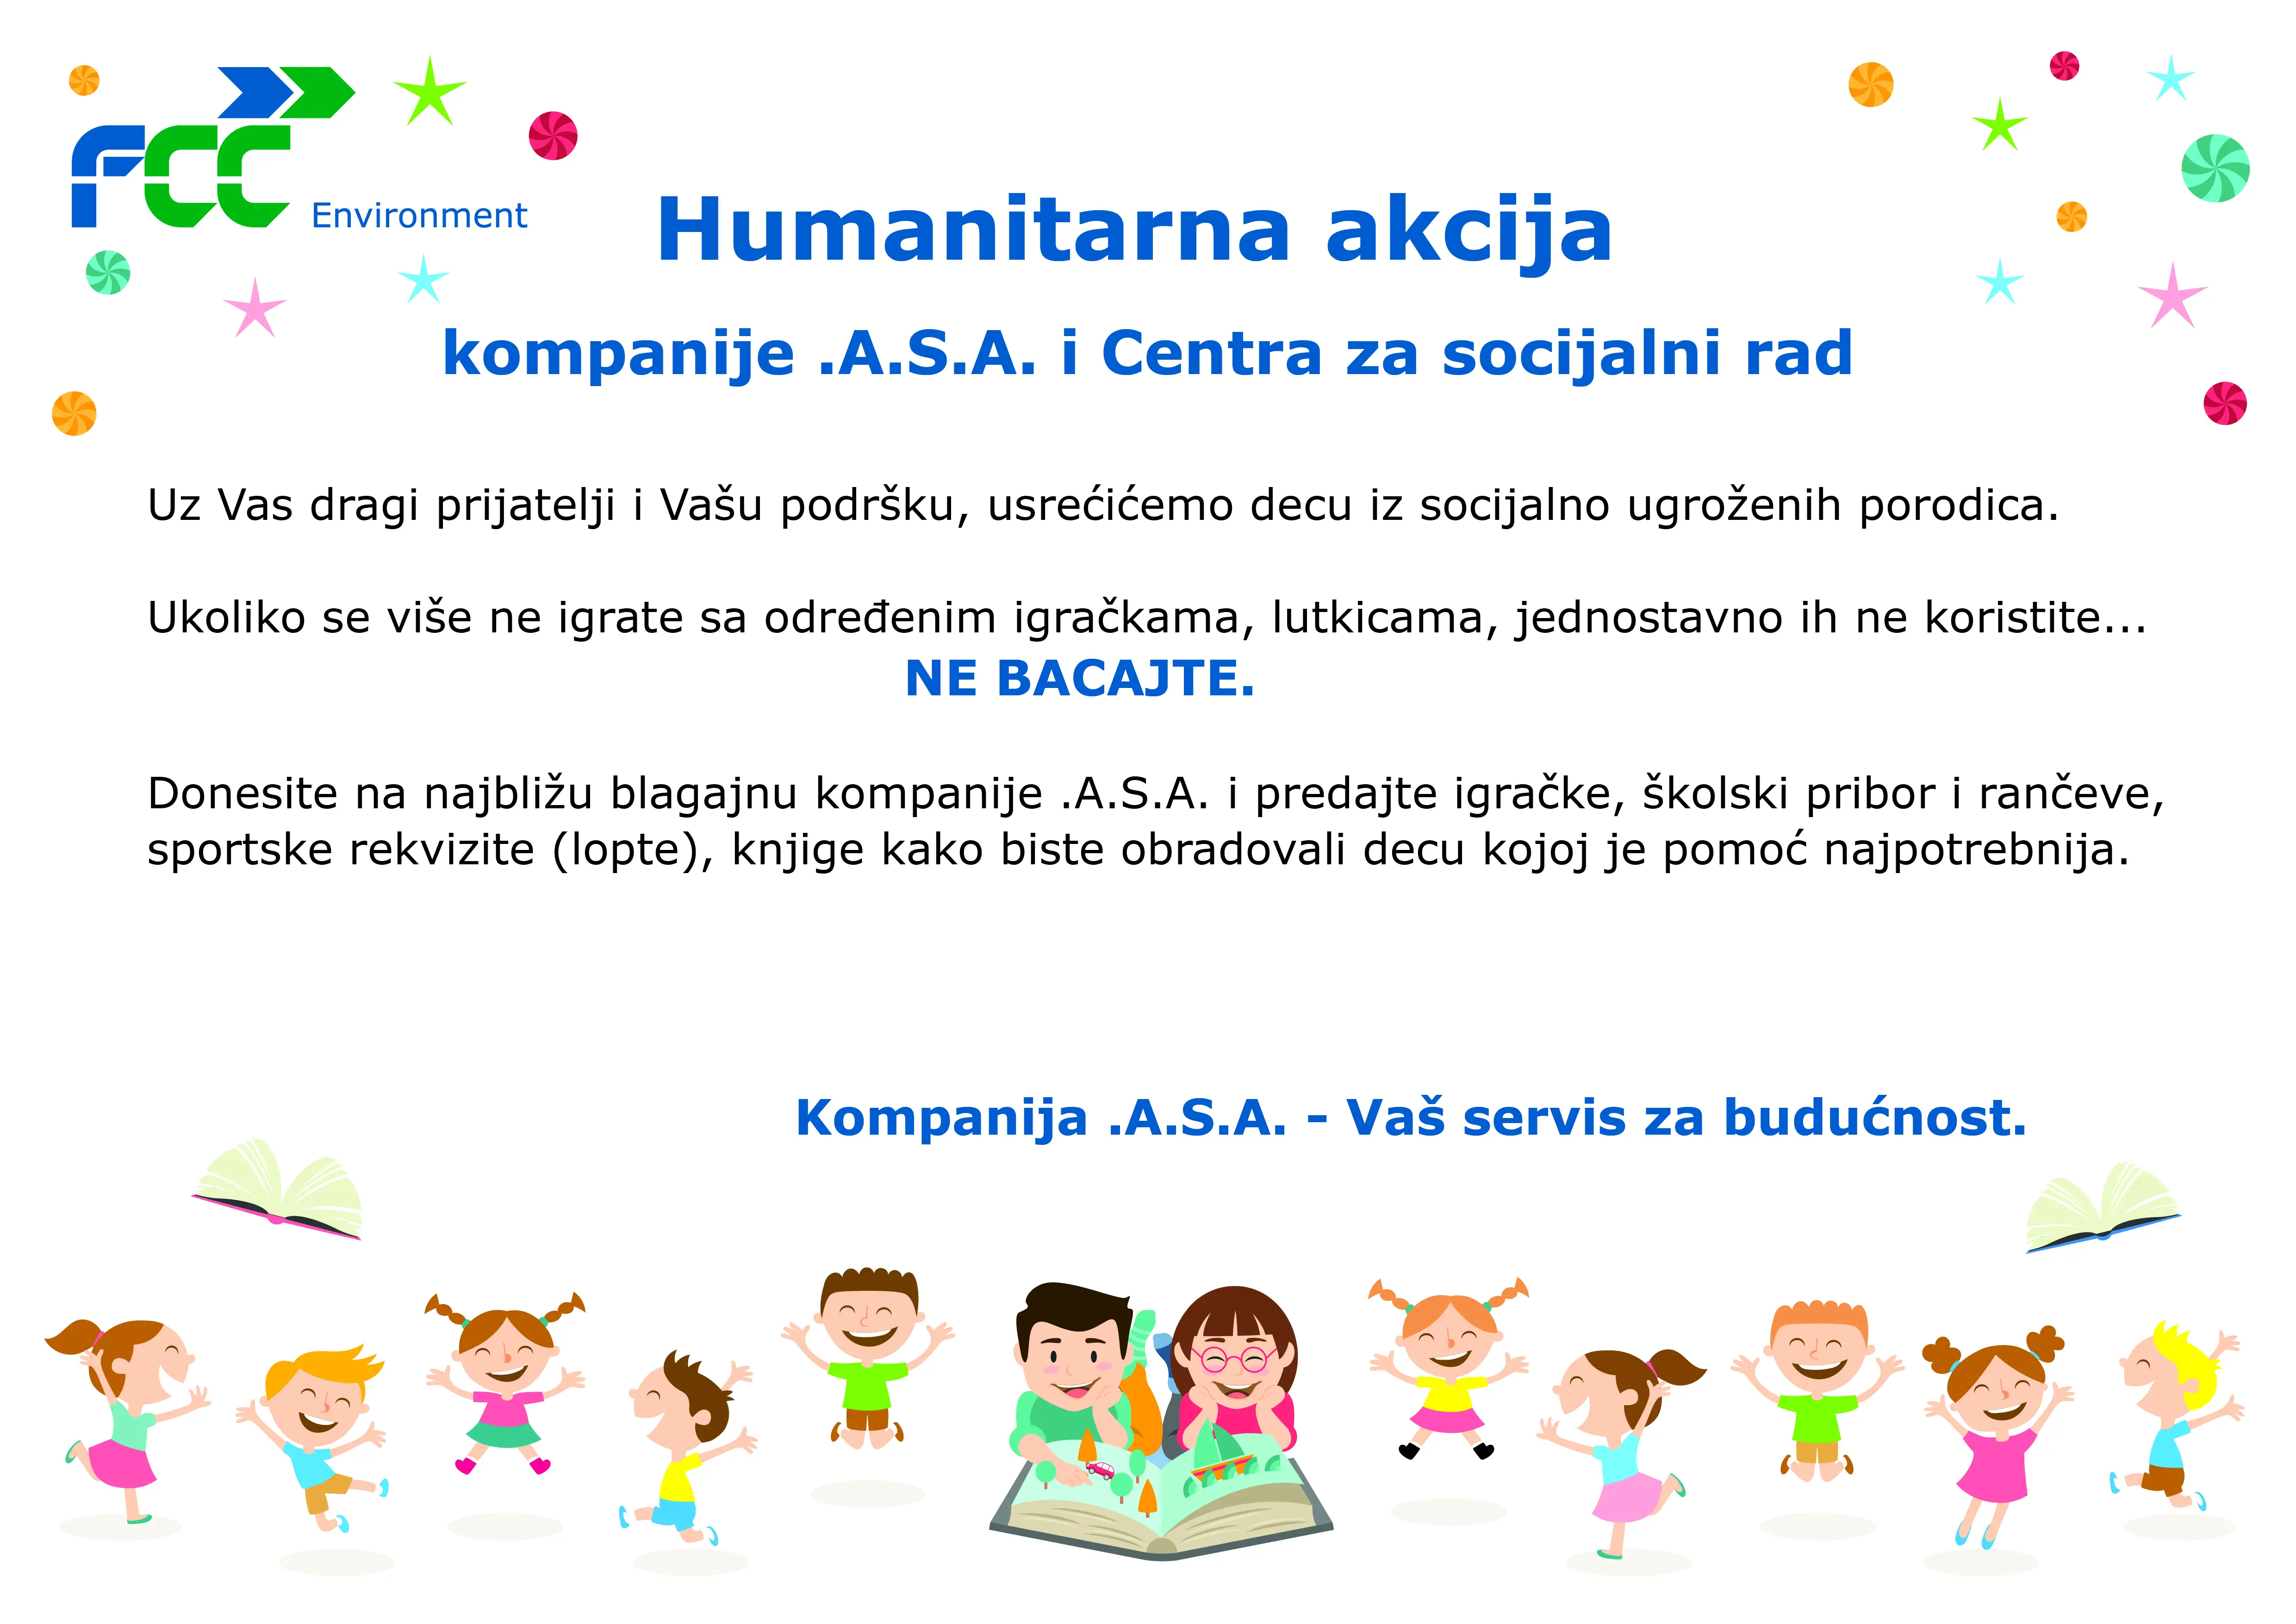 Humanitarian action of the .A.S.A company and the Center for Social Work